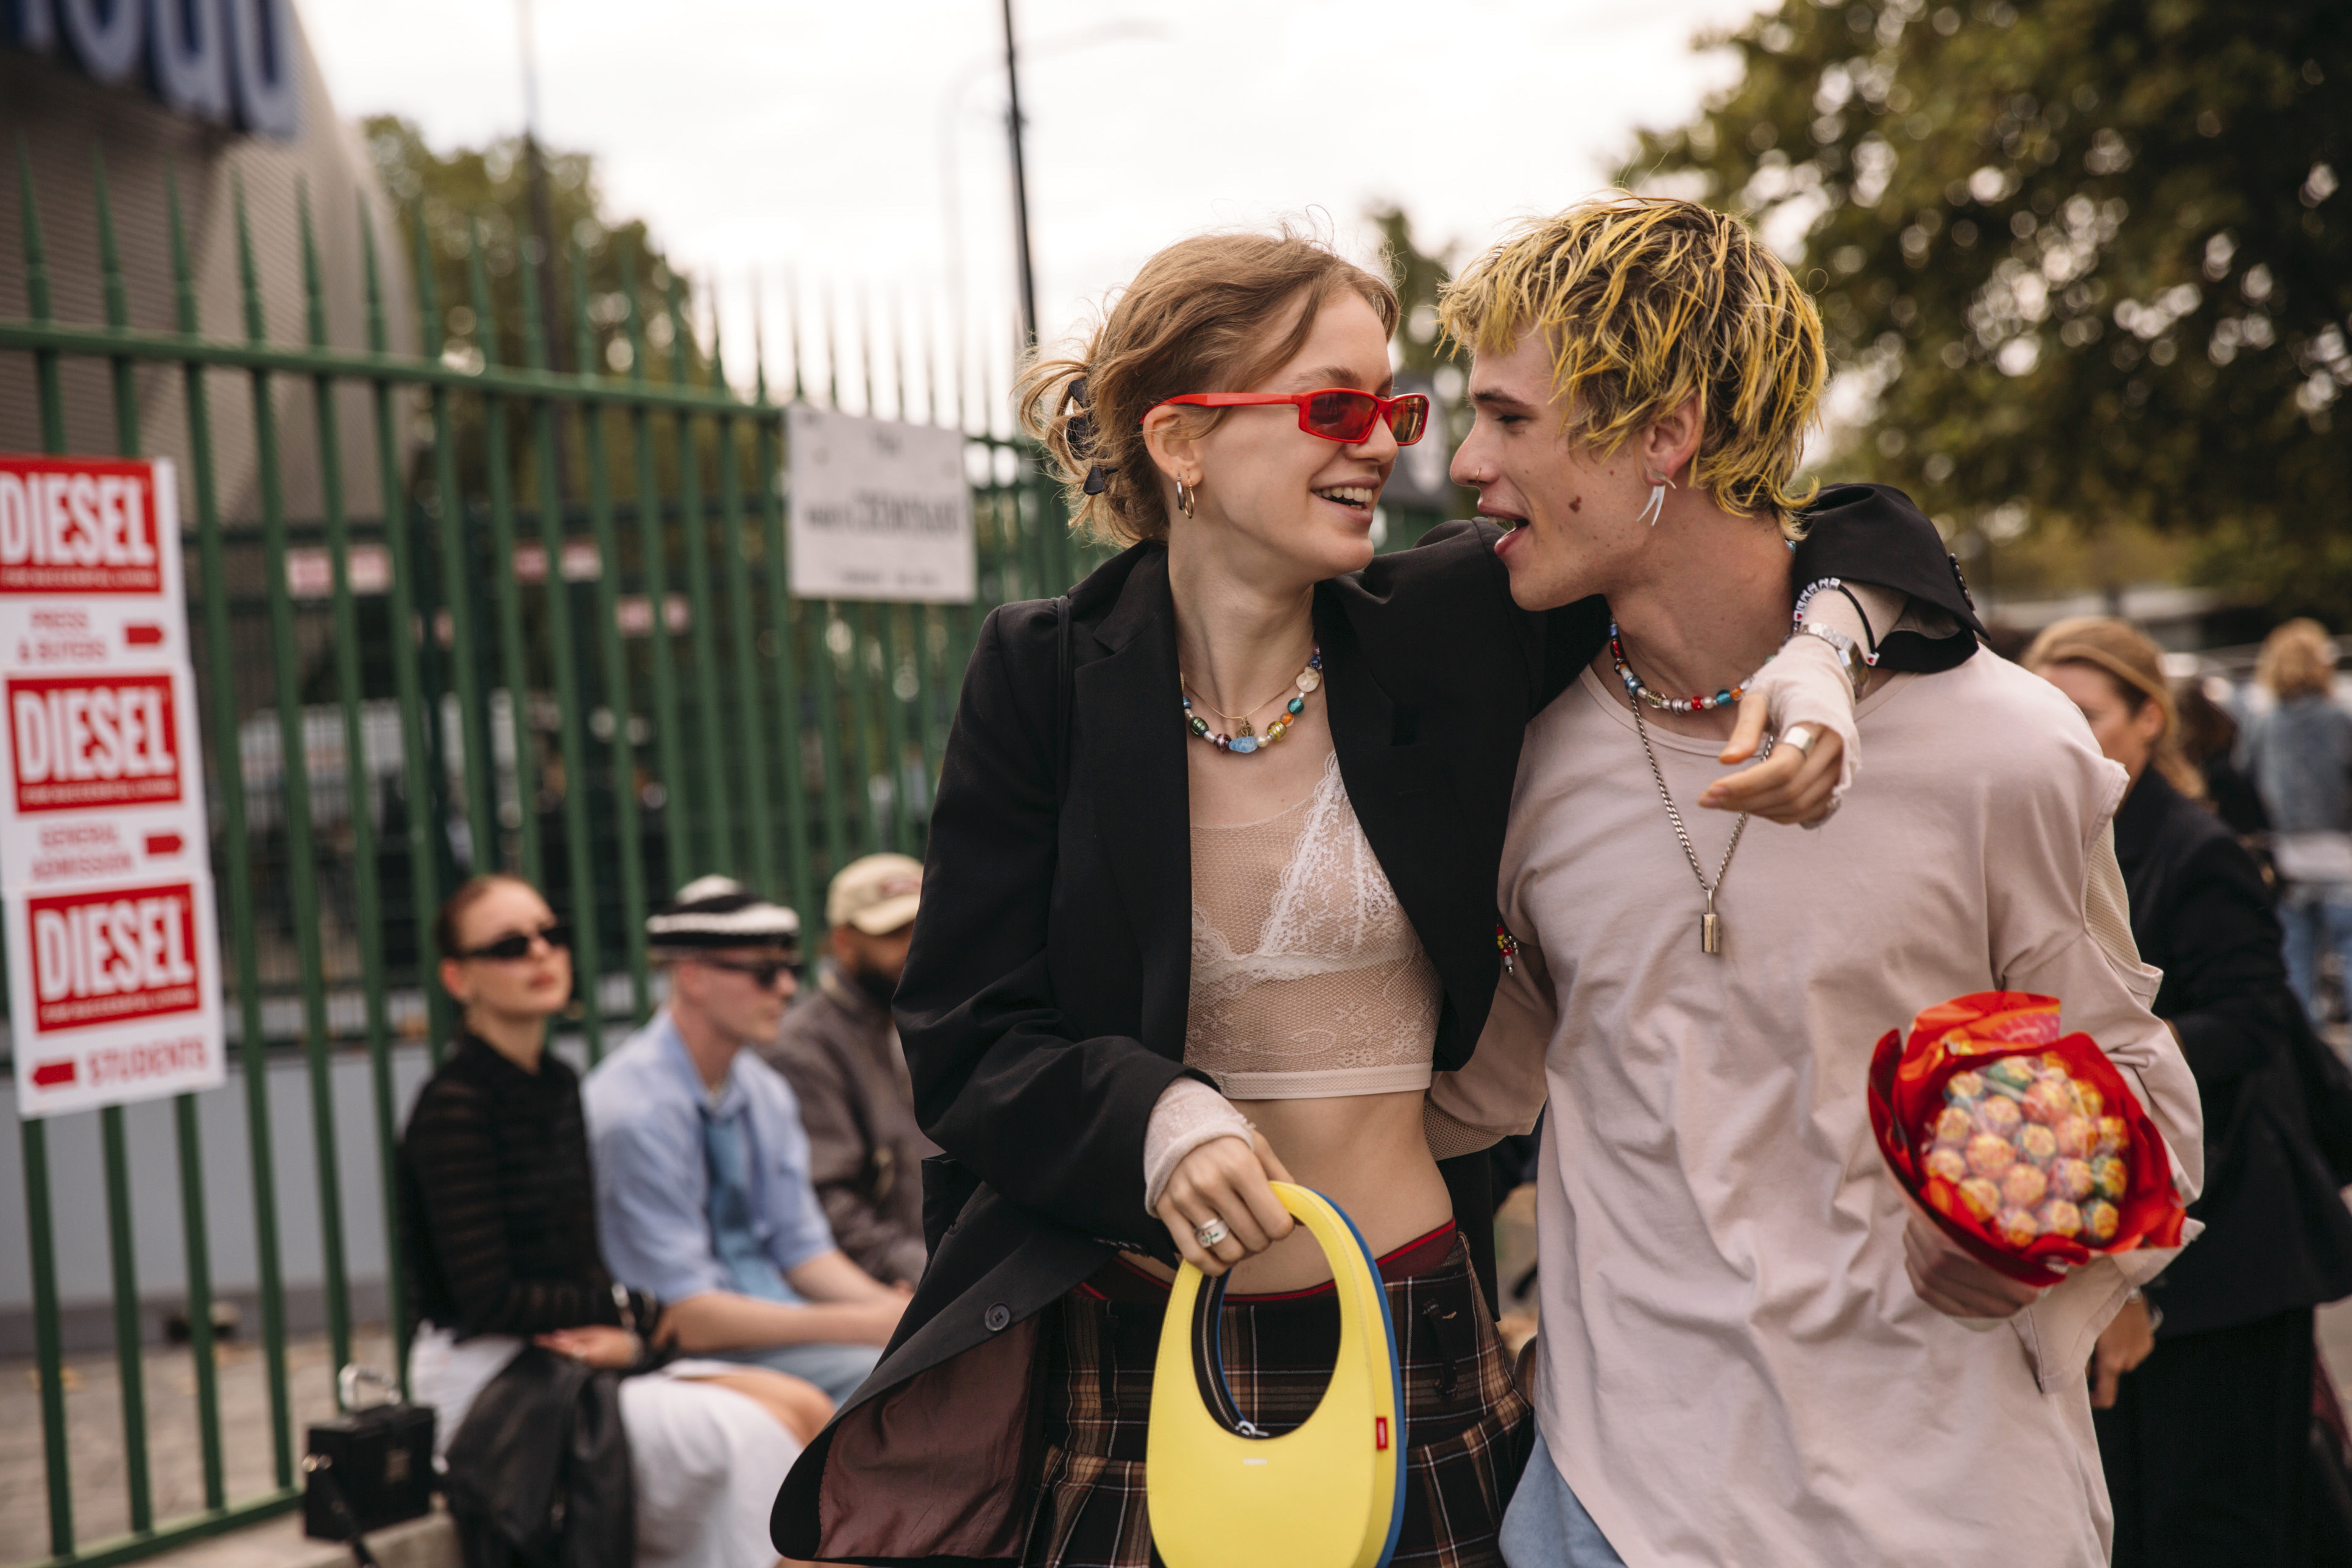 The Best Street Style From Milan Fashion Week Spring/Summer 2022